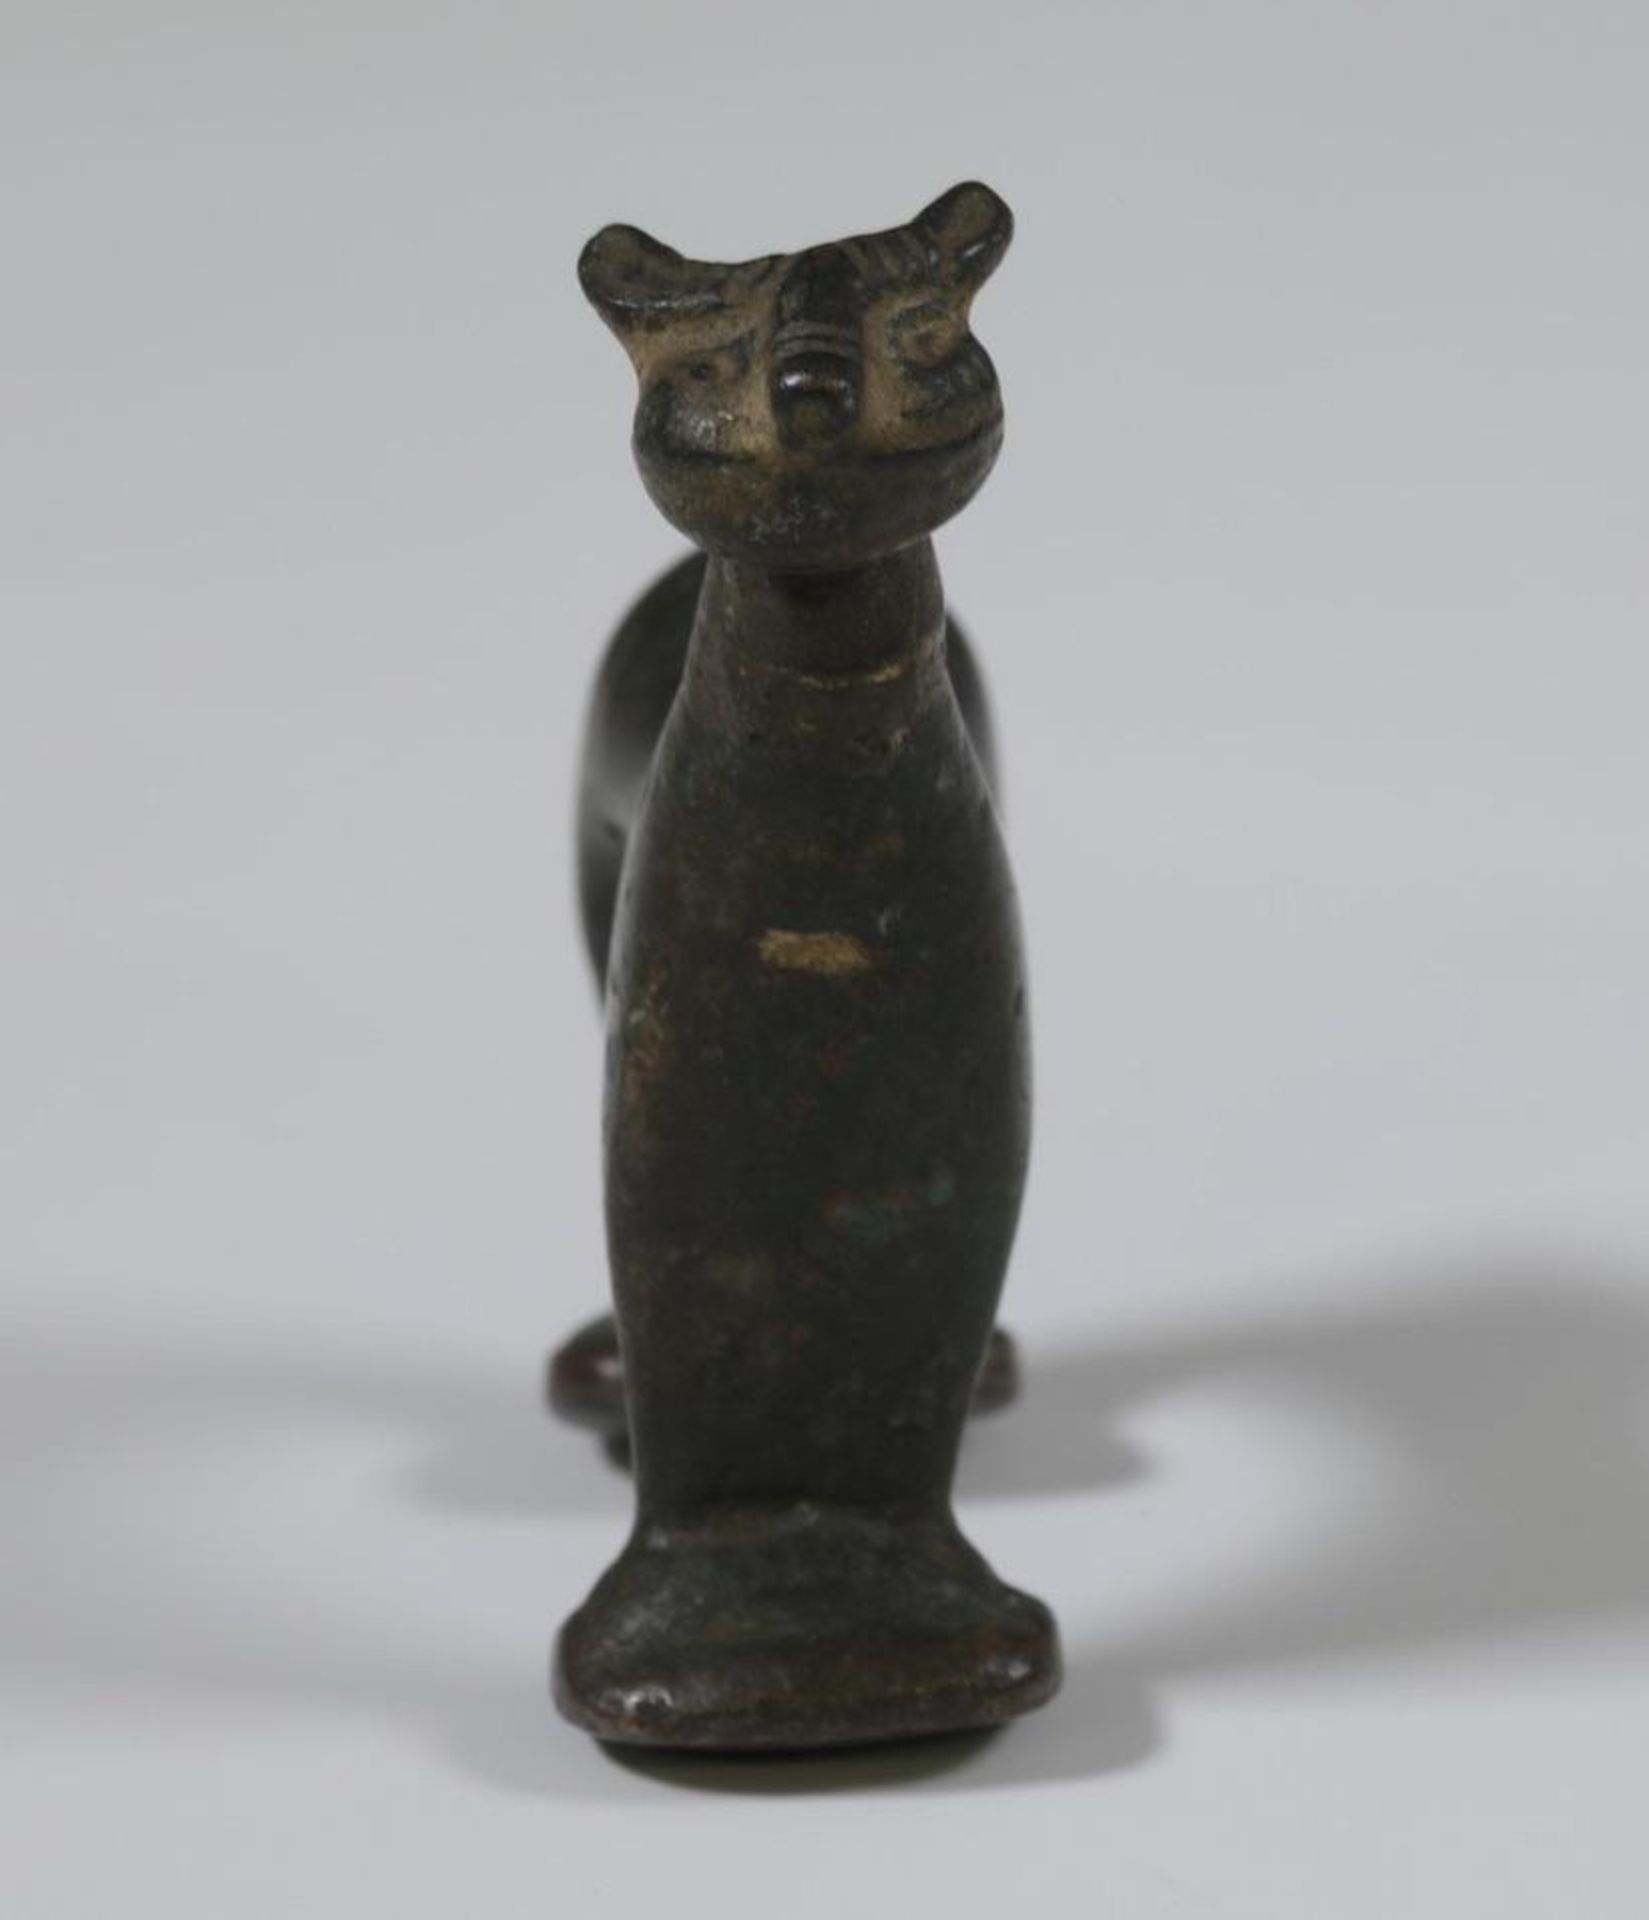 An antique bronze figure of a cat. - Image 4 of 4